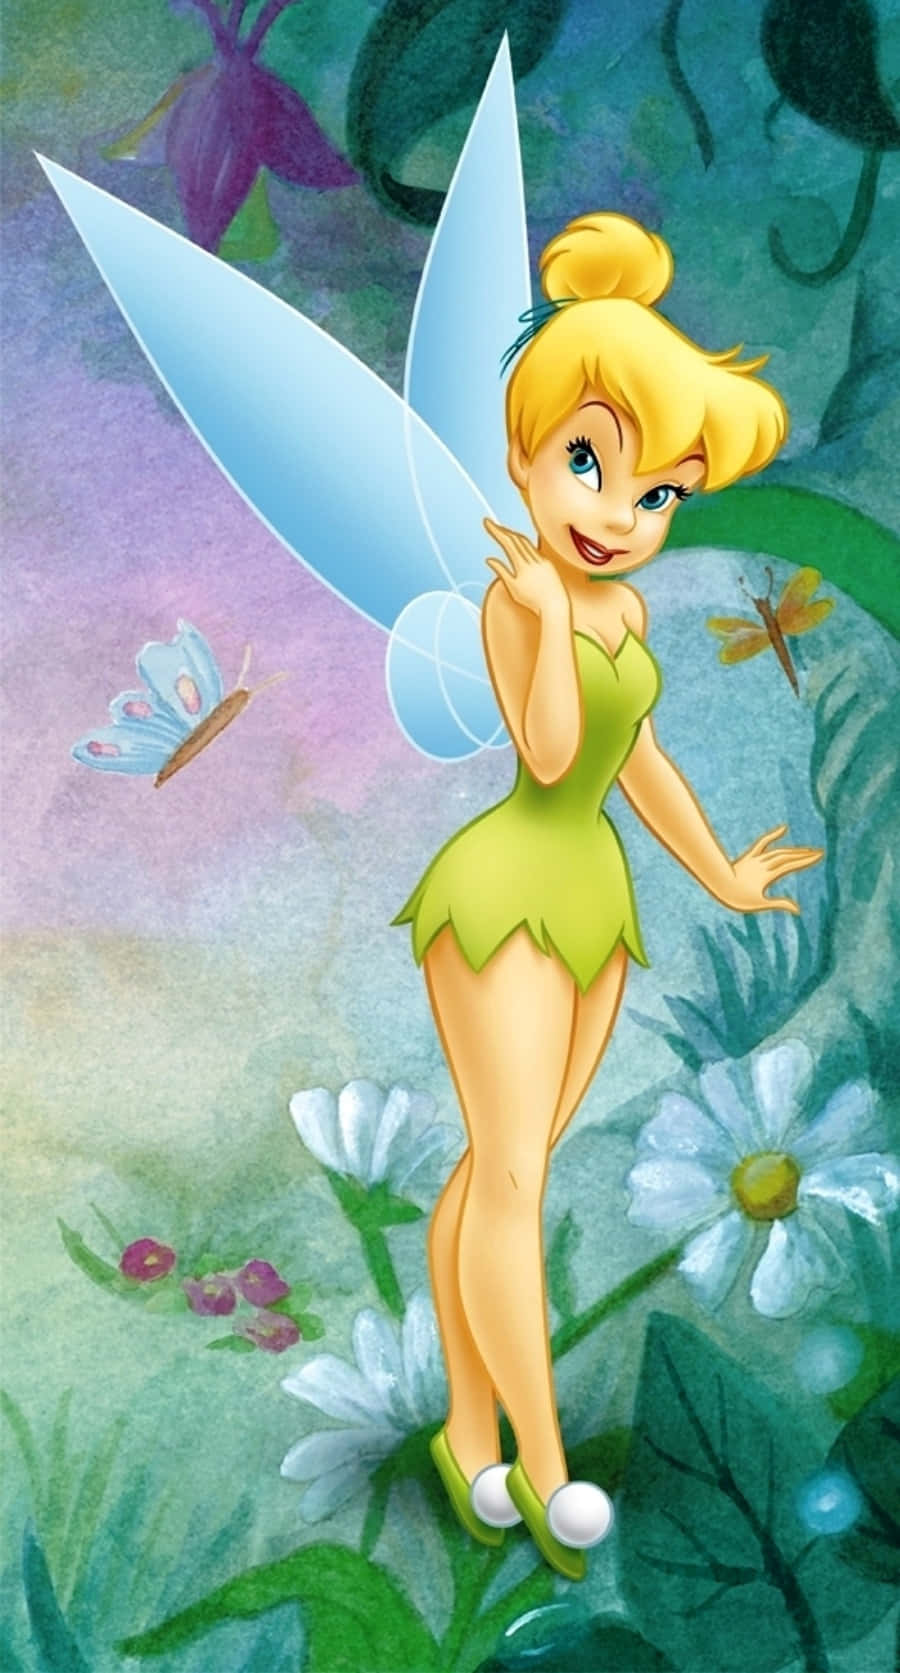 Magical Tinker Bell Flying in the Sky